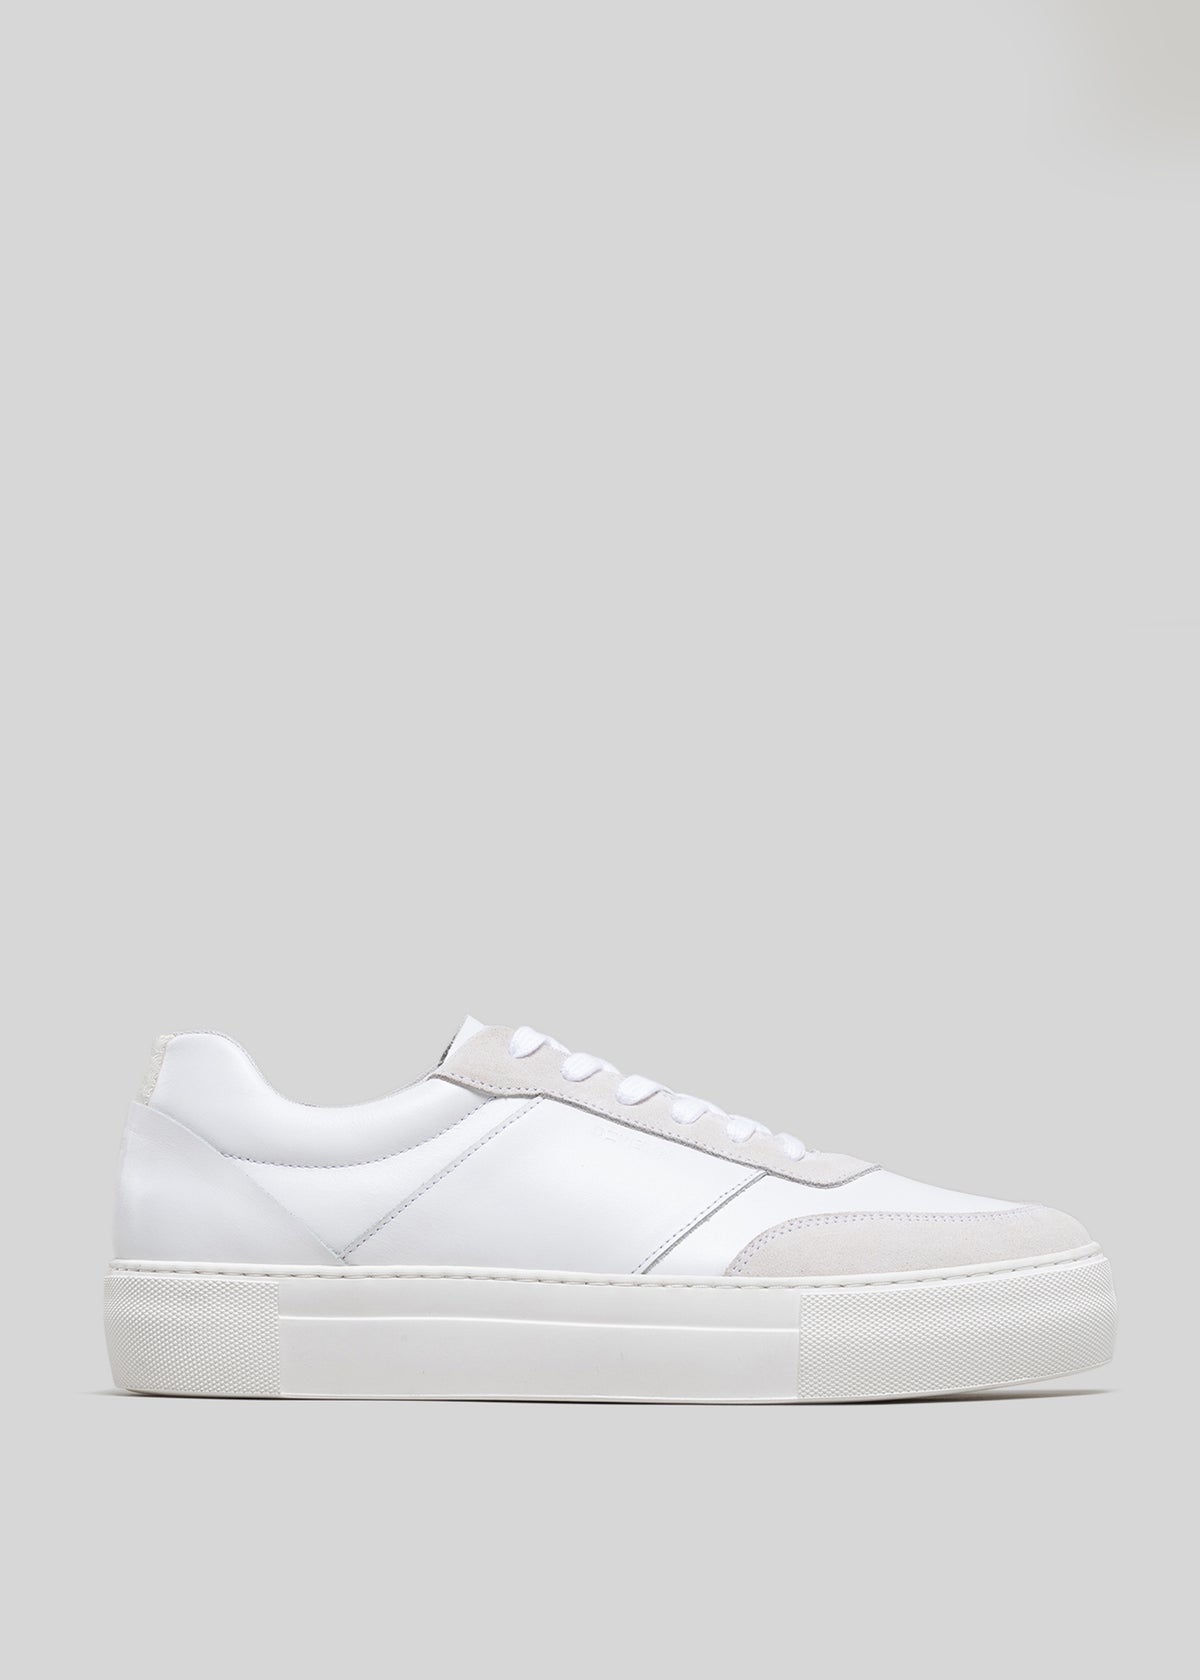 A side view of a Start with a White Canvas, low-top sneaker with a flat sole and white laces against a grey background.